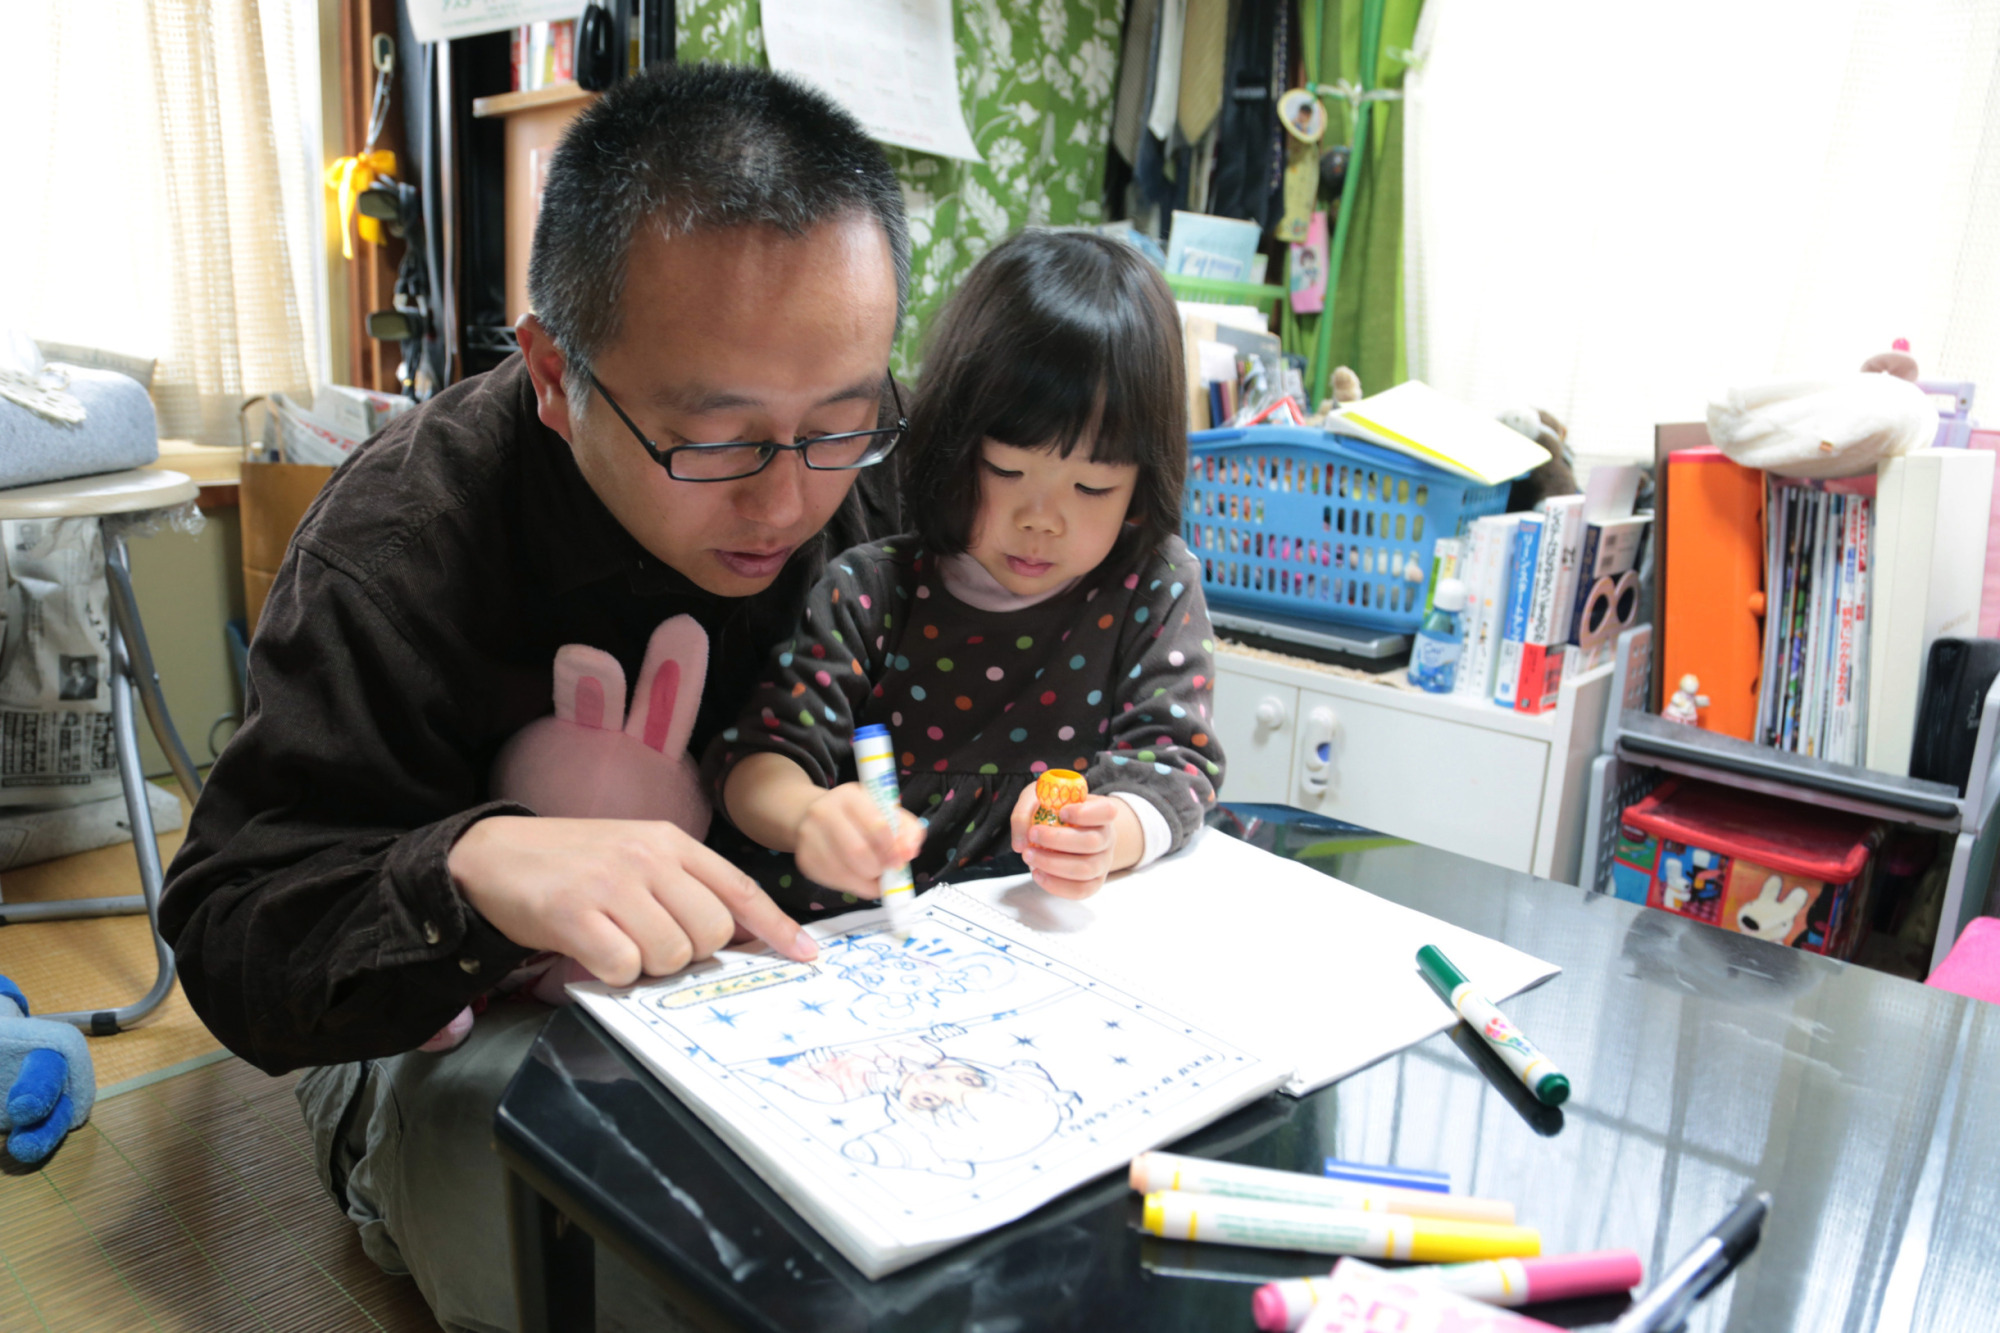 Japan leads the world in paid leave set aside for fathers but few take advantage of it, according to a new report by UNICEF. | BLOOMBERG